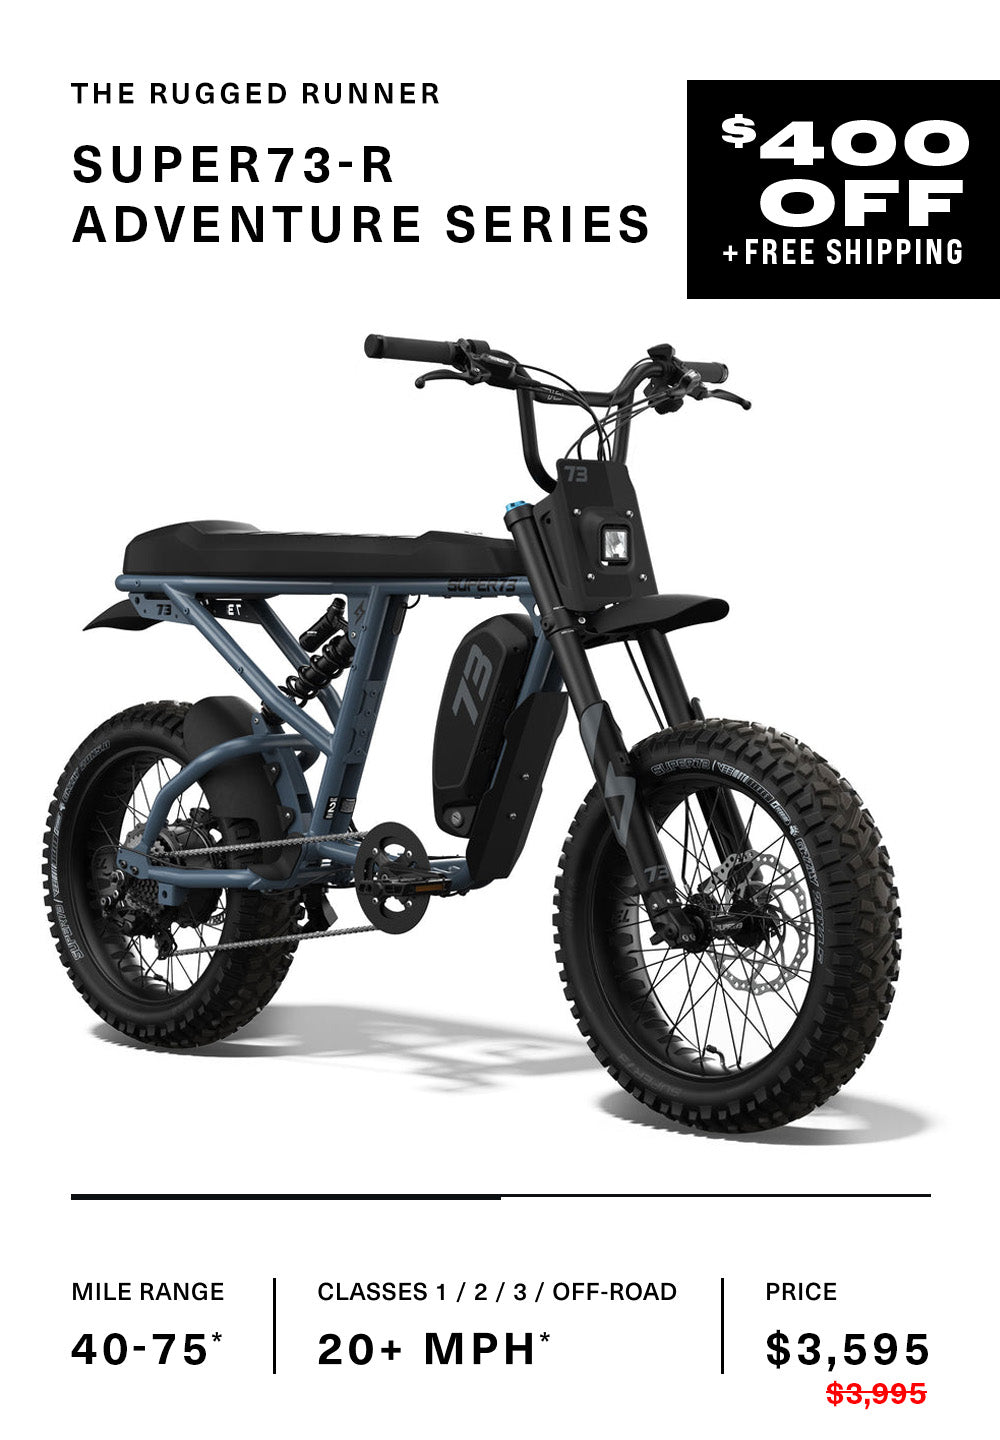 Promotion image showing SUPER73-R Adventure in Panthro Blue at $400 off with free shipping